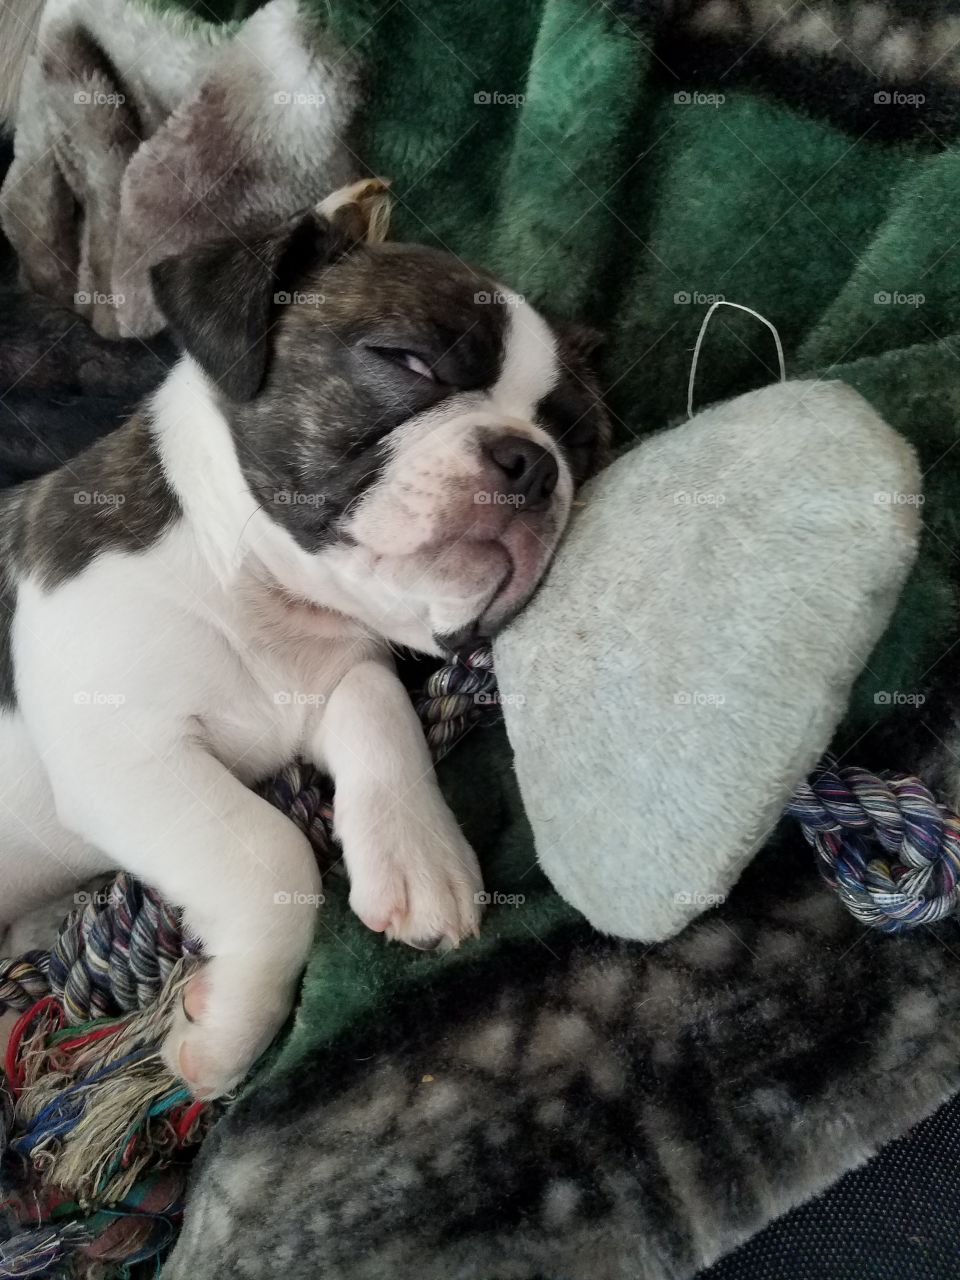 Asleep with his toys